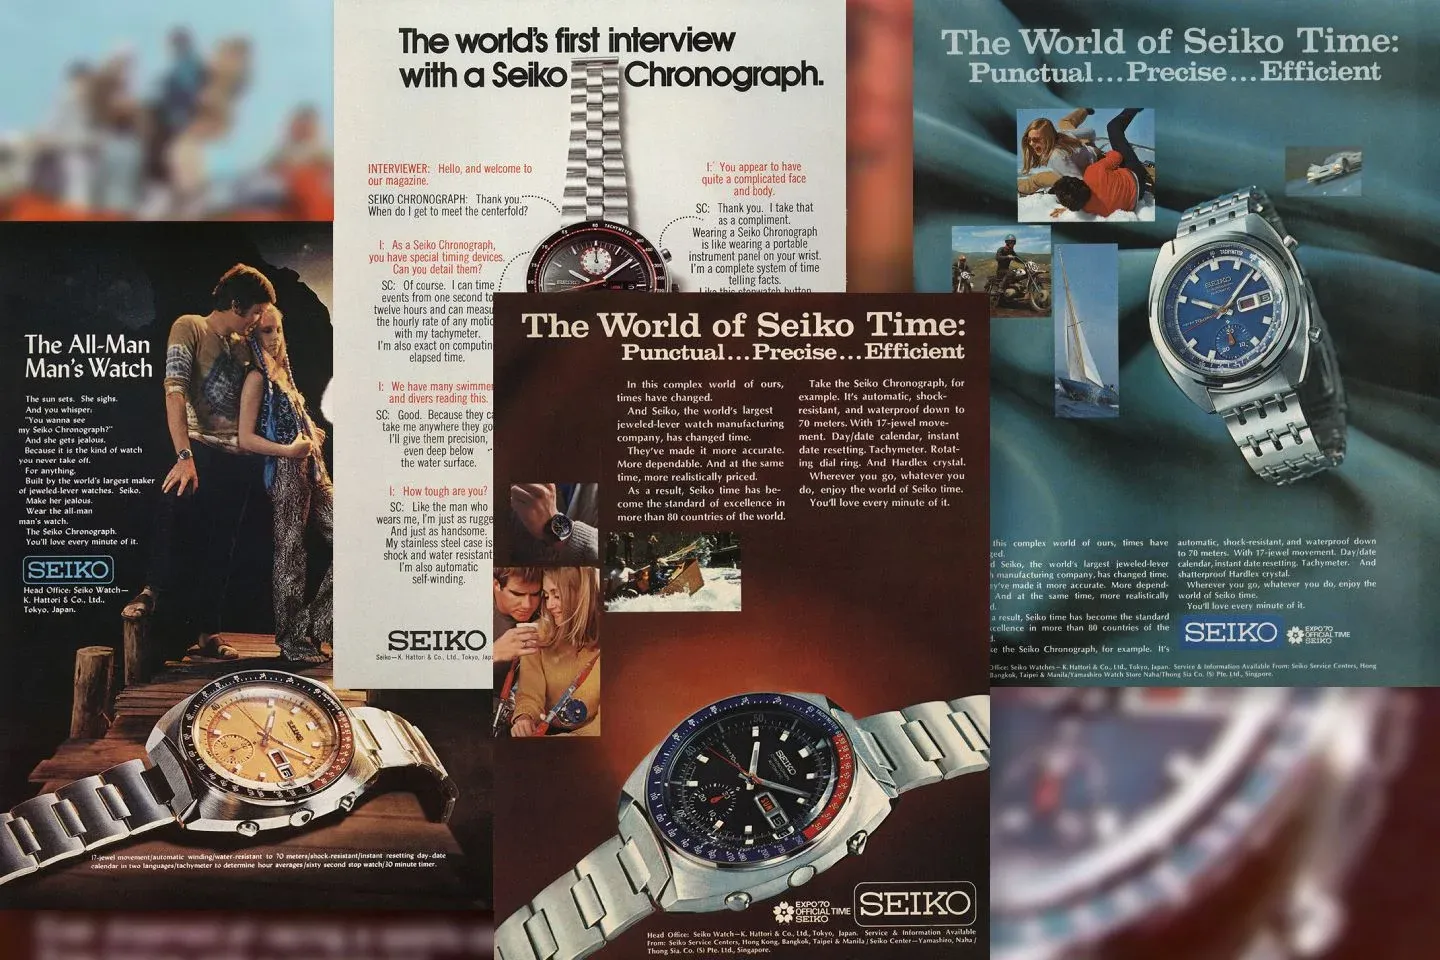 Early advertising campaigns for the Seiko 6139 Speedtime